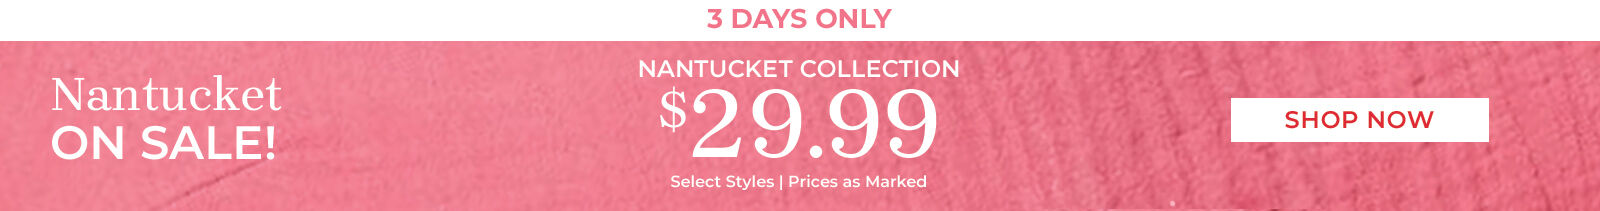 3 days only nantucket on sale! nantucket collection $29.99 select styles | prices as marked. shop now